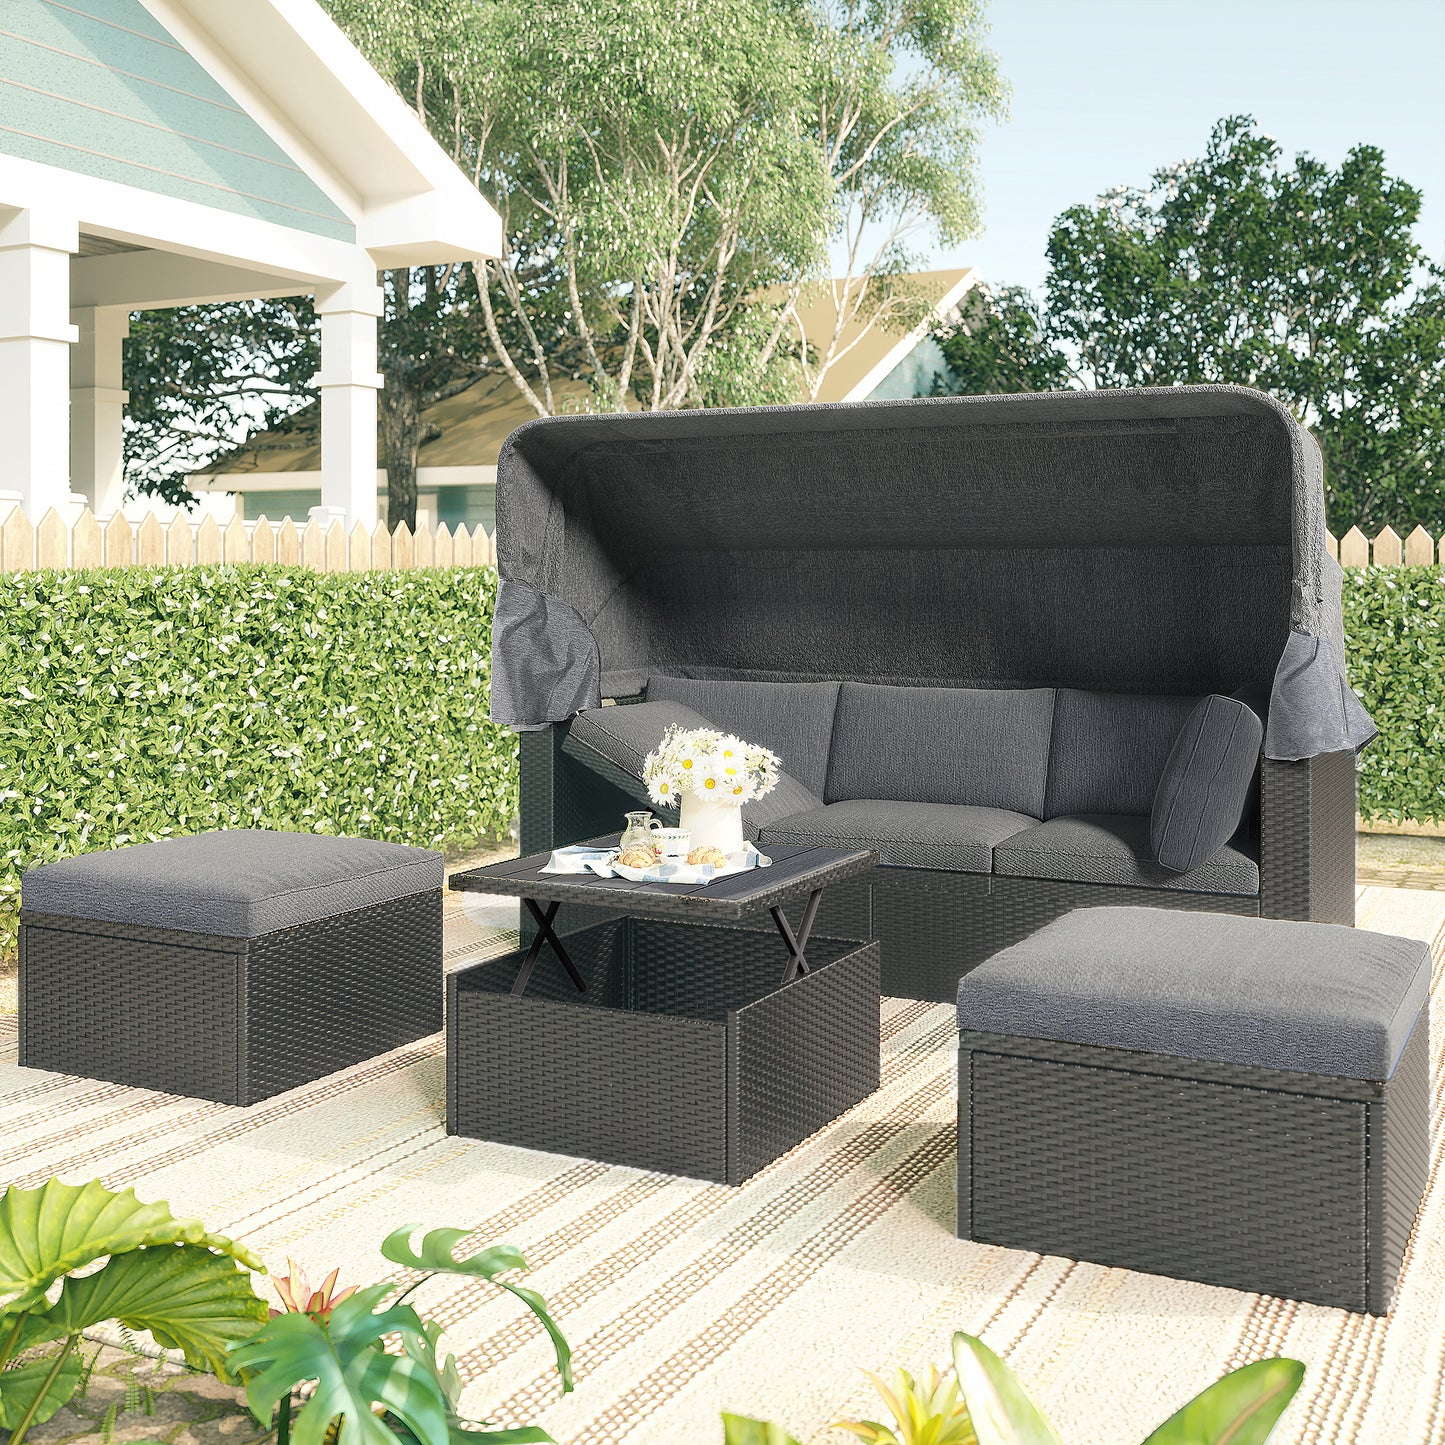 U_Style Outdoor Patio Rectangle Daybed with Retractable Canopy,  Wicker Furniture Sectional Seating with Washable Cushions, Backyard, Porch